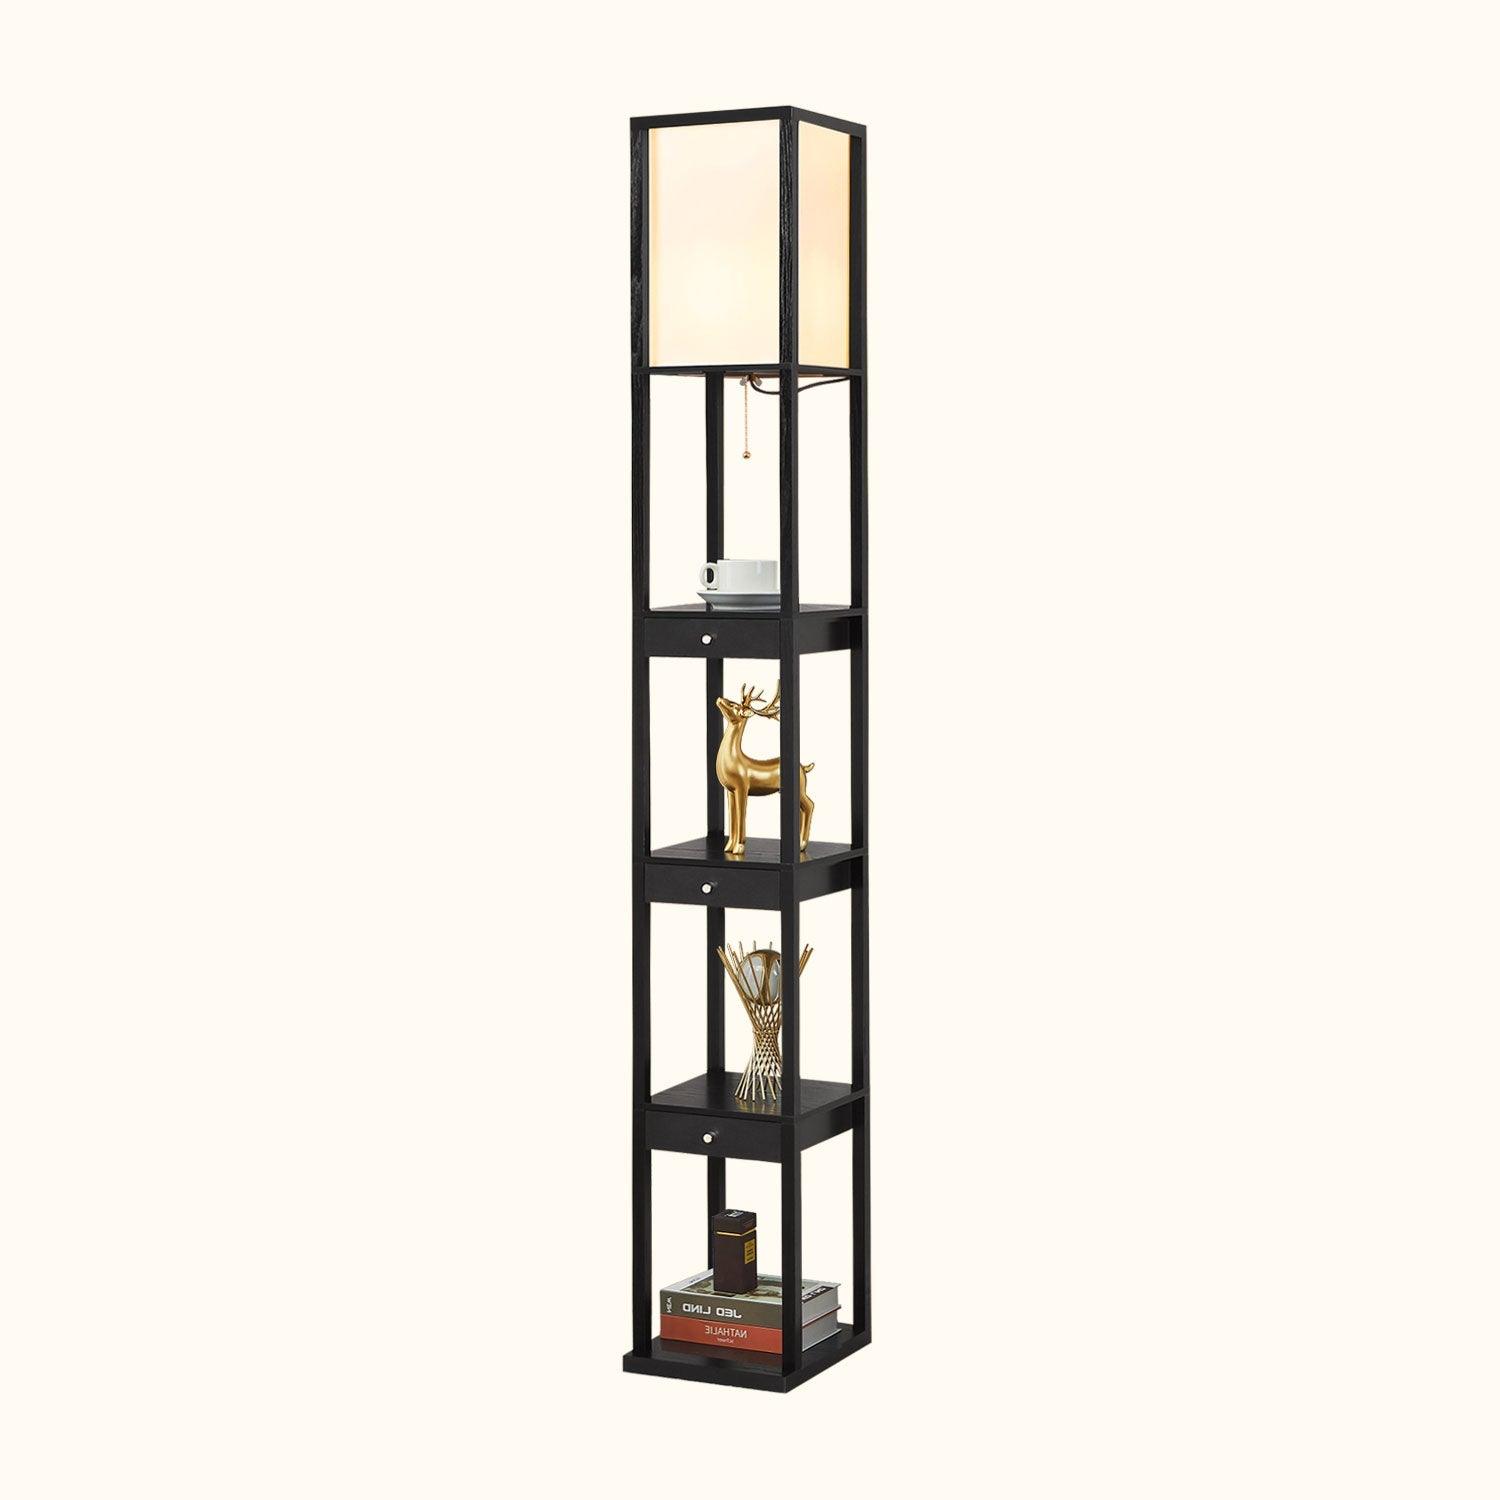 ATAMIN Aaron Classic LED Floor Lamp with Storage Drawers